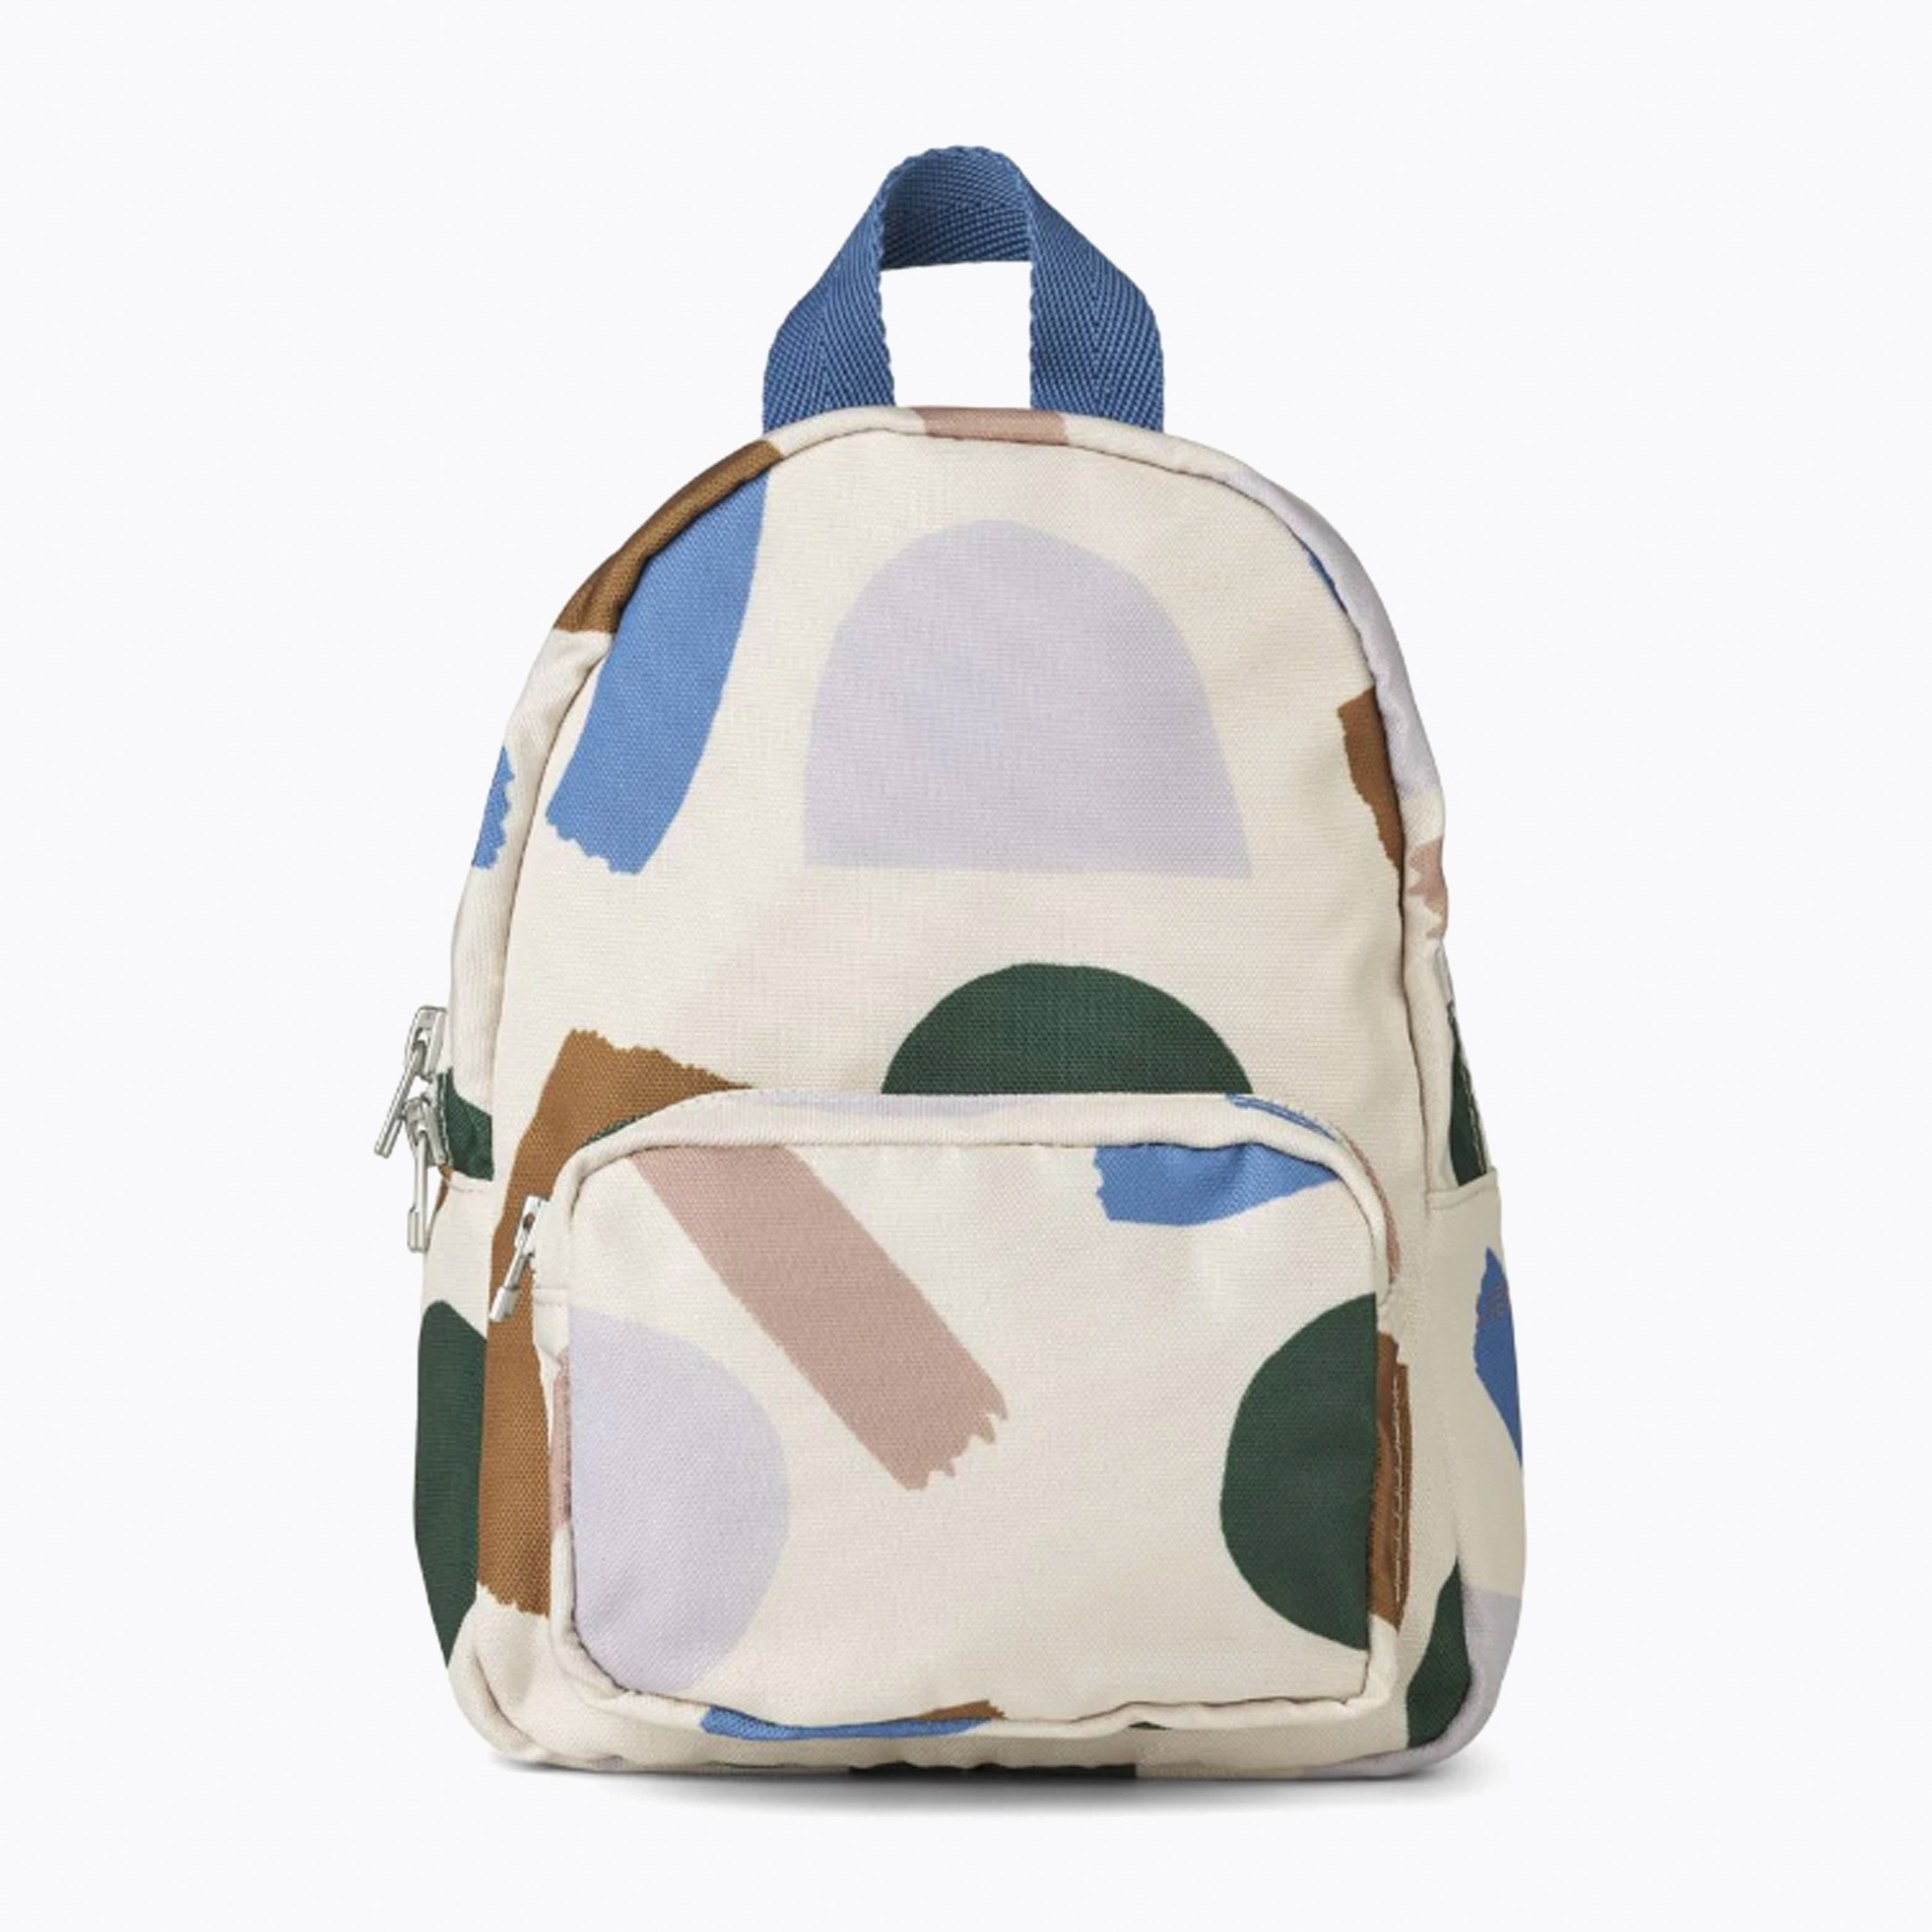 An image of Kids Backpack - Liewood Saxo Backpack Mini | Small Smart UK